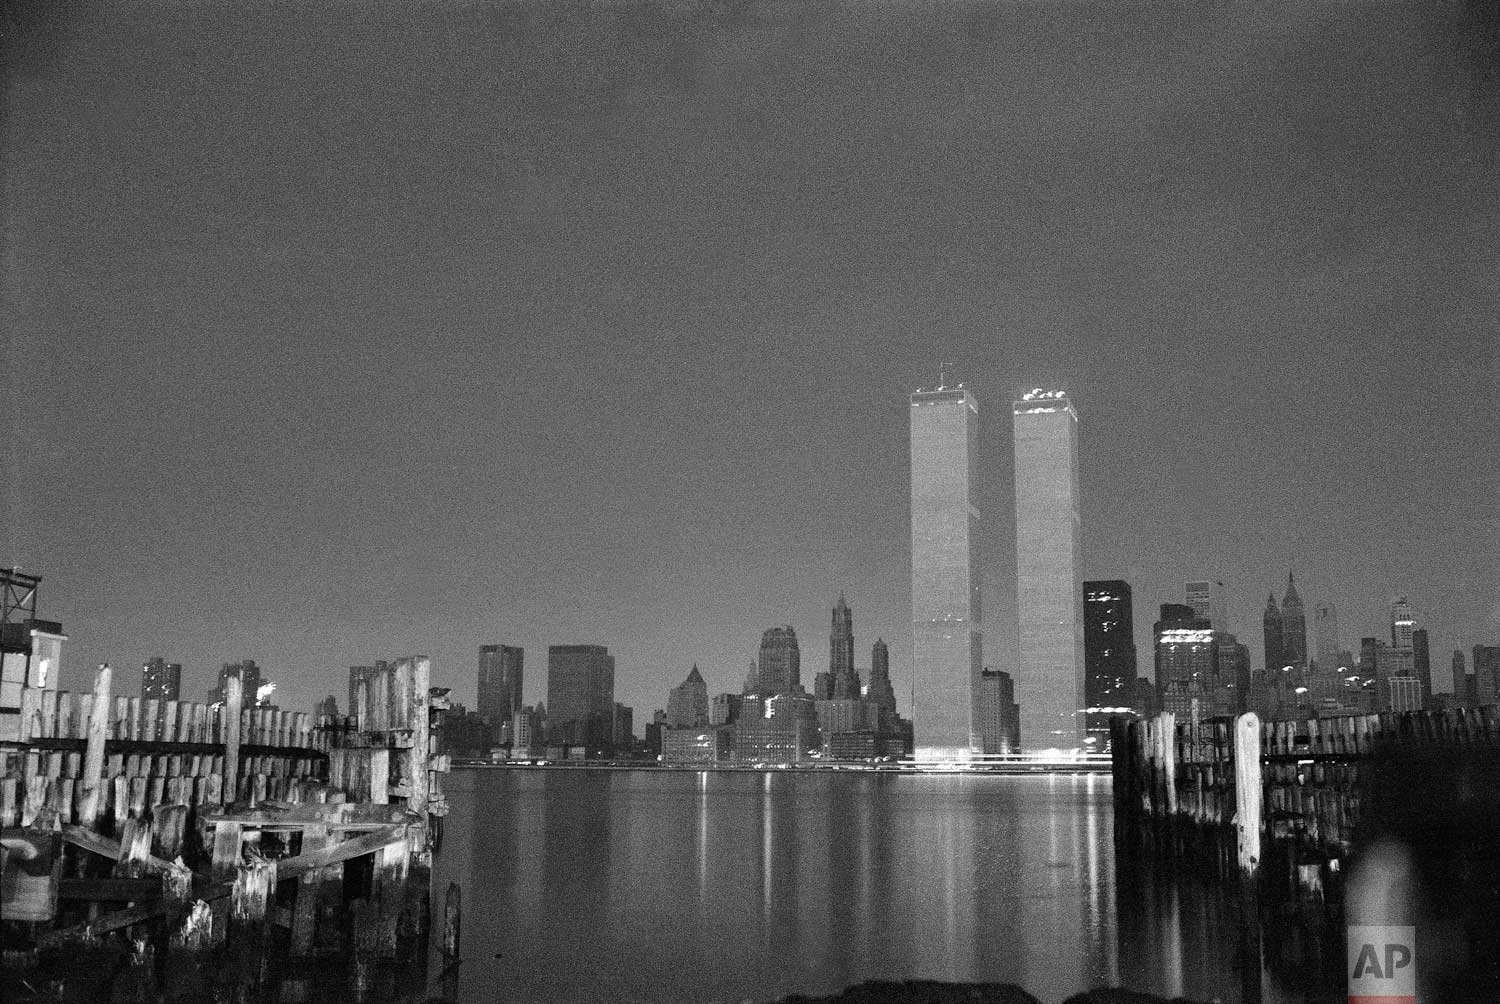  The World Trade Center stands out against a blackened New York City skyline after a power failure struck the city, July 14, 1977. Lightning striking a power station is blamed for the blackout.  (AP Photo/Lennox McLendon) 